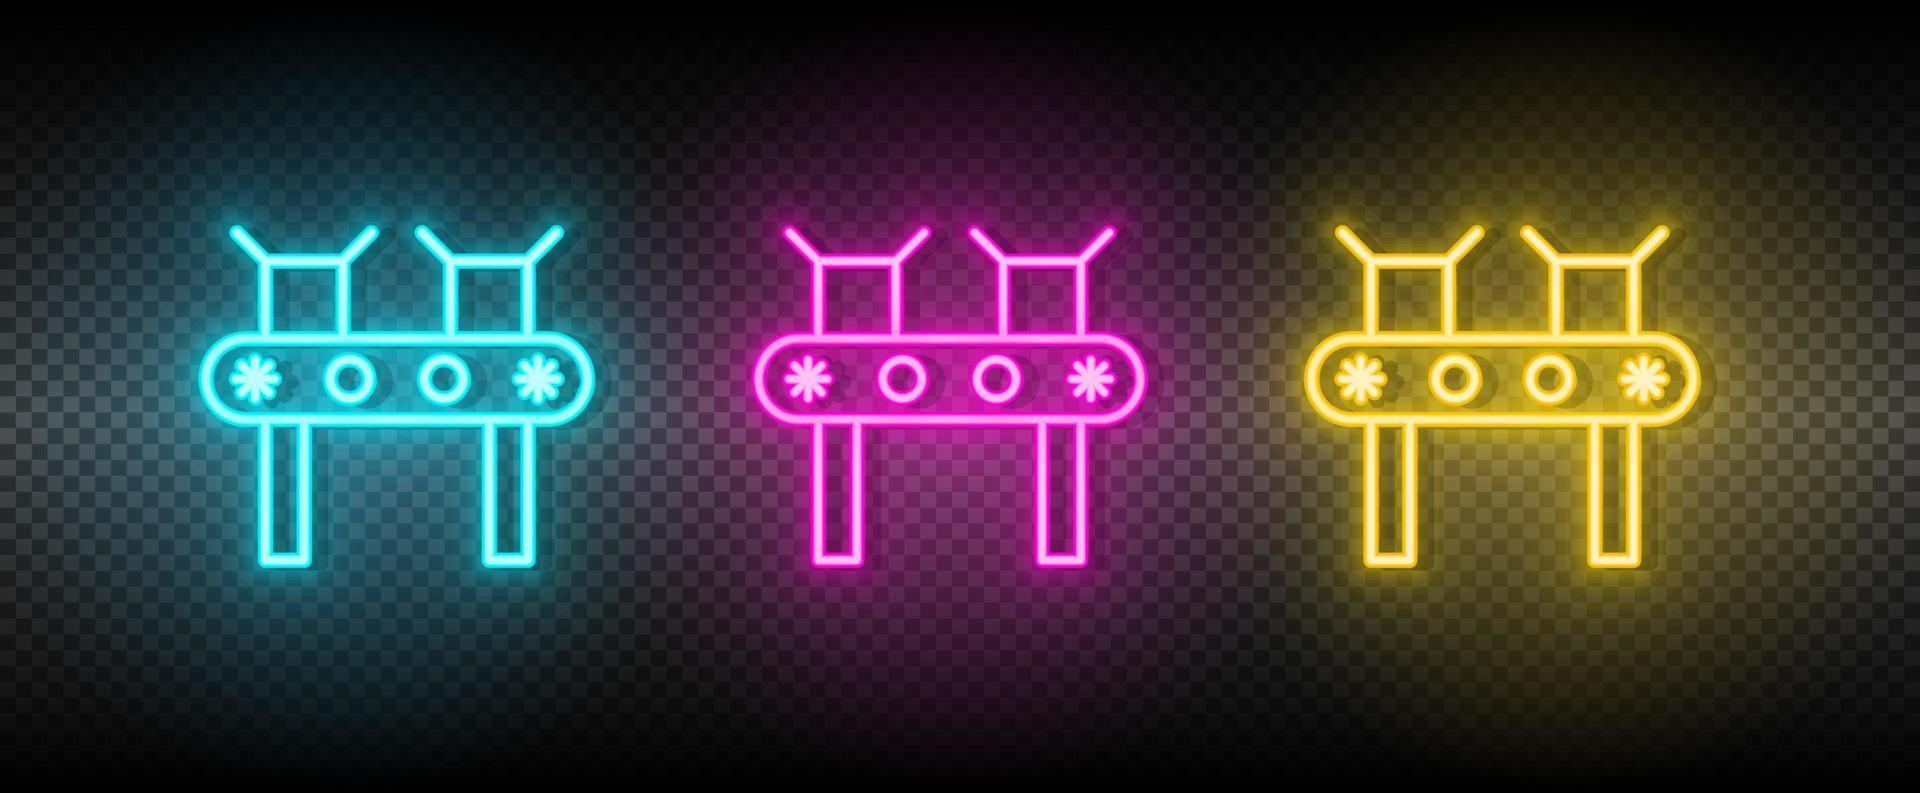 conveyor belt, package neon icon set. Technology vector illustration neon blue, yellow, red icon set